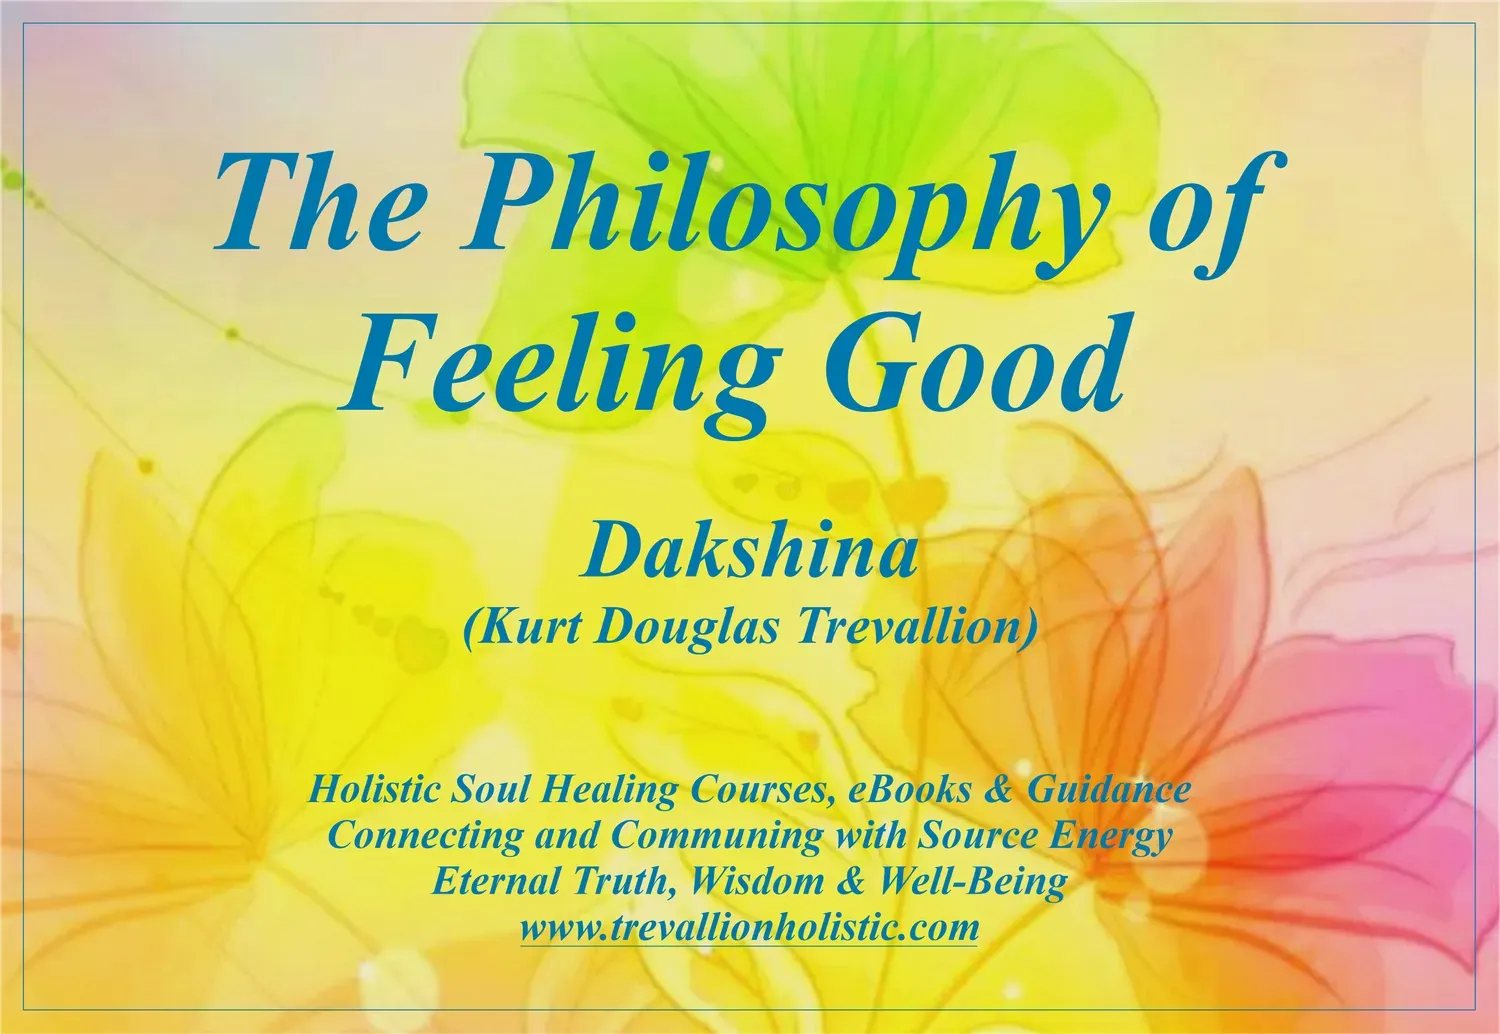 eBook Cover - The Philosophy of Feeling Good